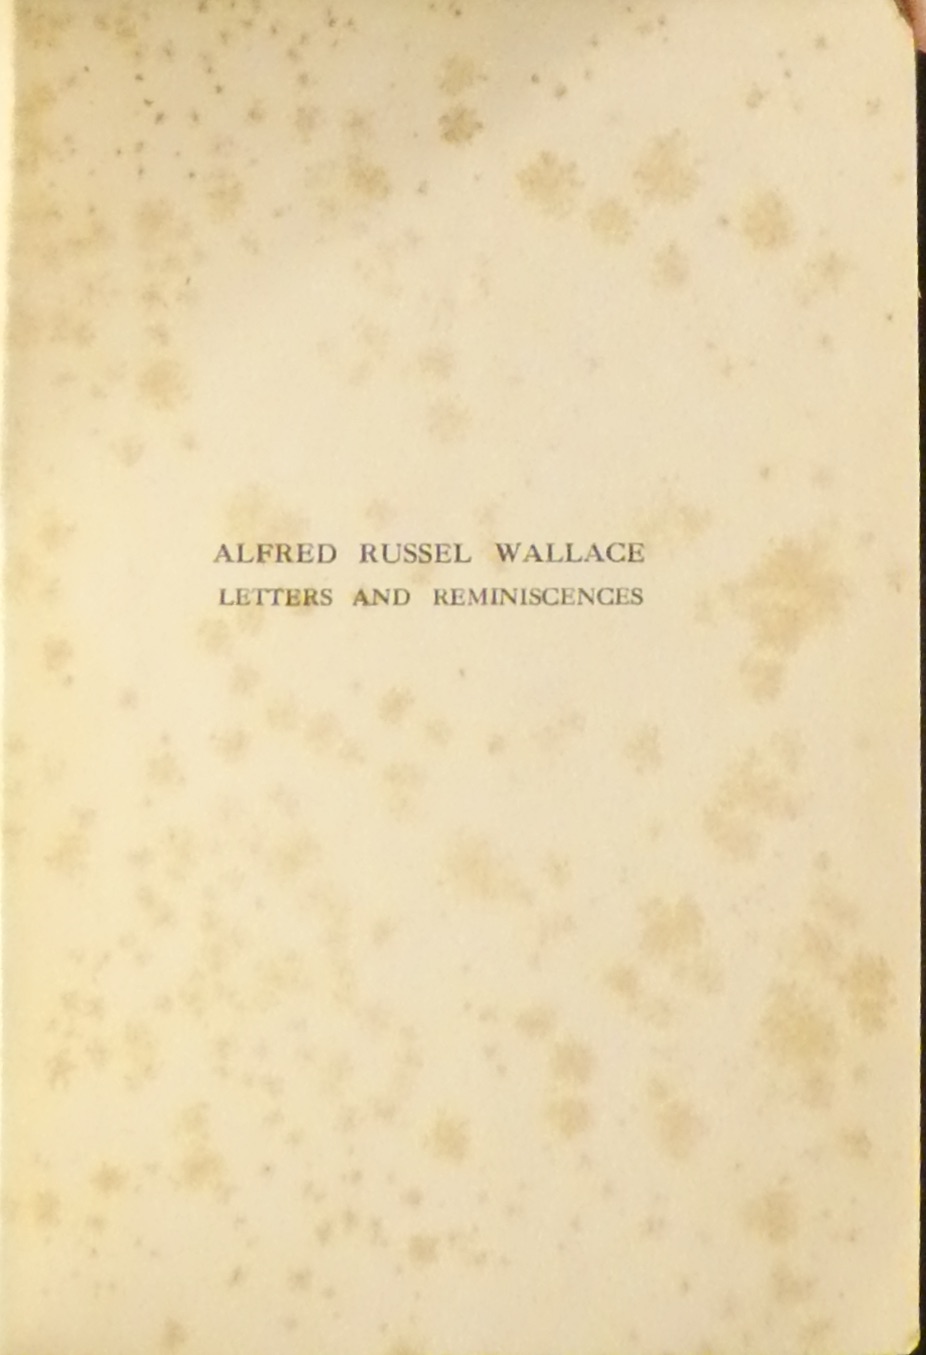 Marchant, James ed. 1916. Alfred Russel Wallace letters and reminiscences.  London: Cassell. Volume 1.